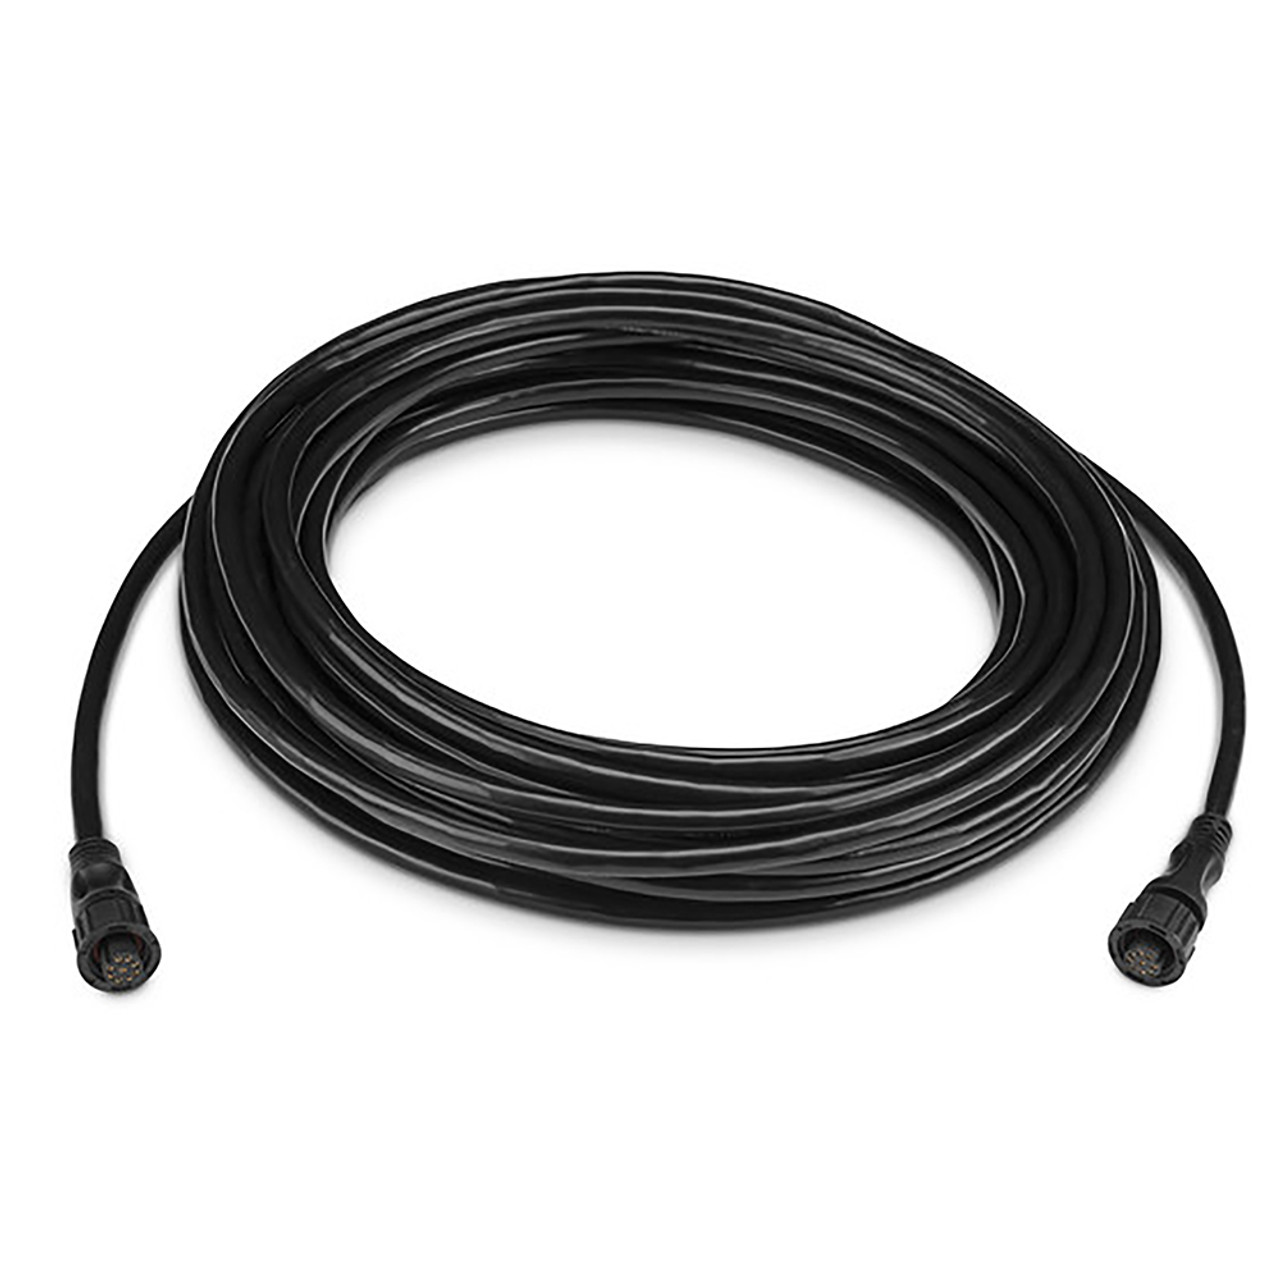 Garmin Marine Network Cables w\/ Small Connector - 12m [010-12528-02]